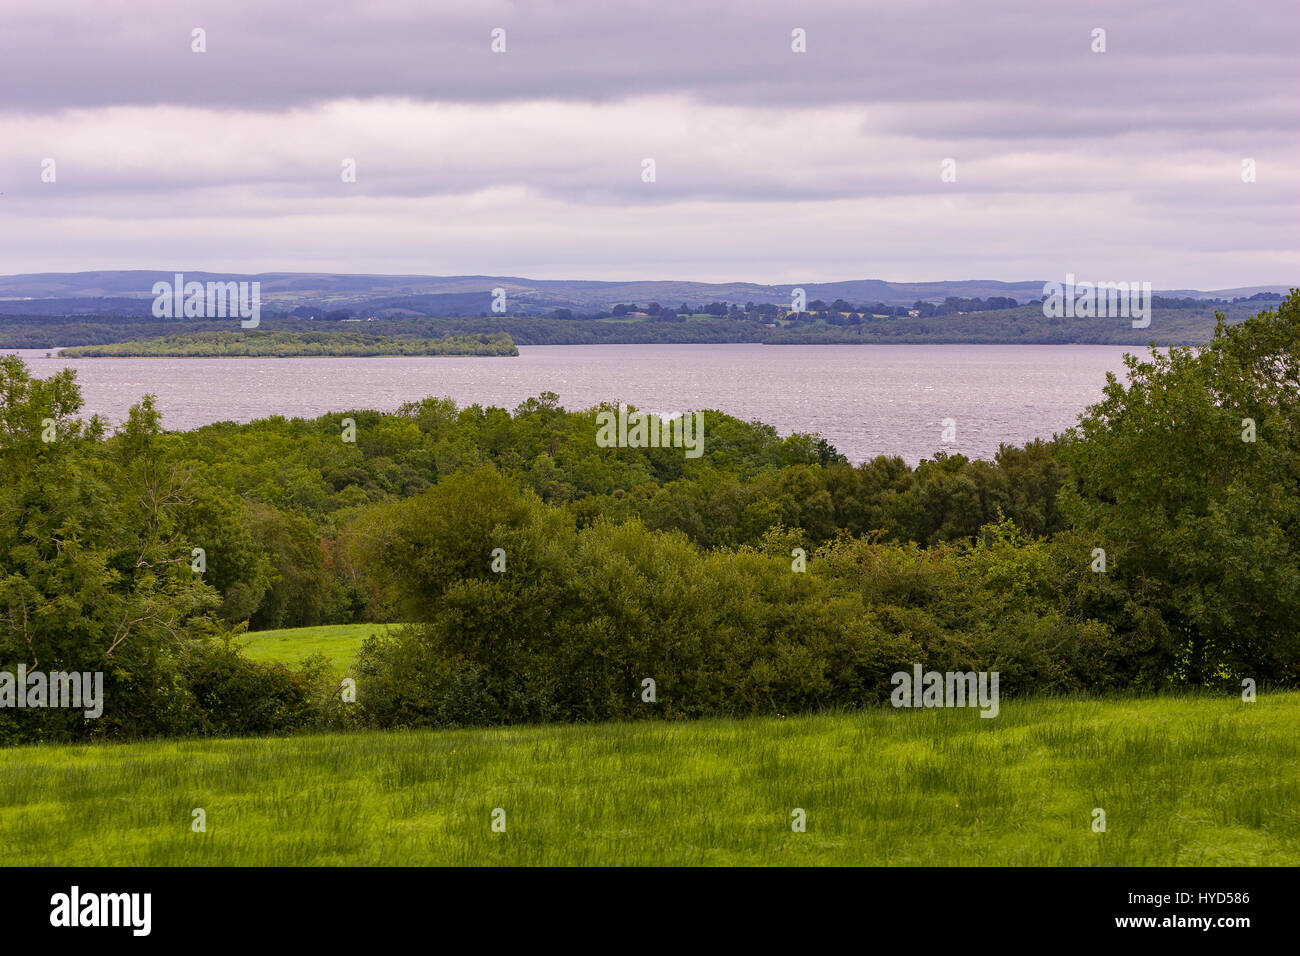 TULLY CASTLE, NORTHERN IRELAND - View of fields and Lower Lough Erne, from the ruins of Tully Castle, near Enniskillen. Stock Photo